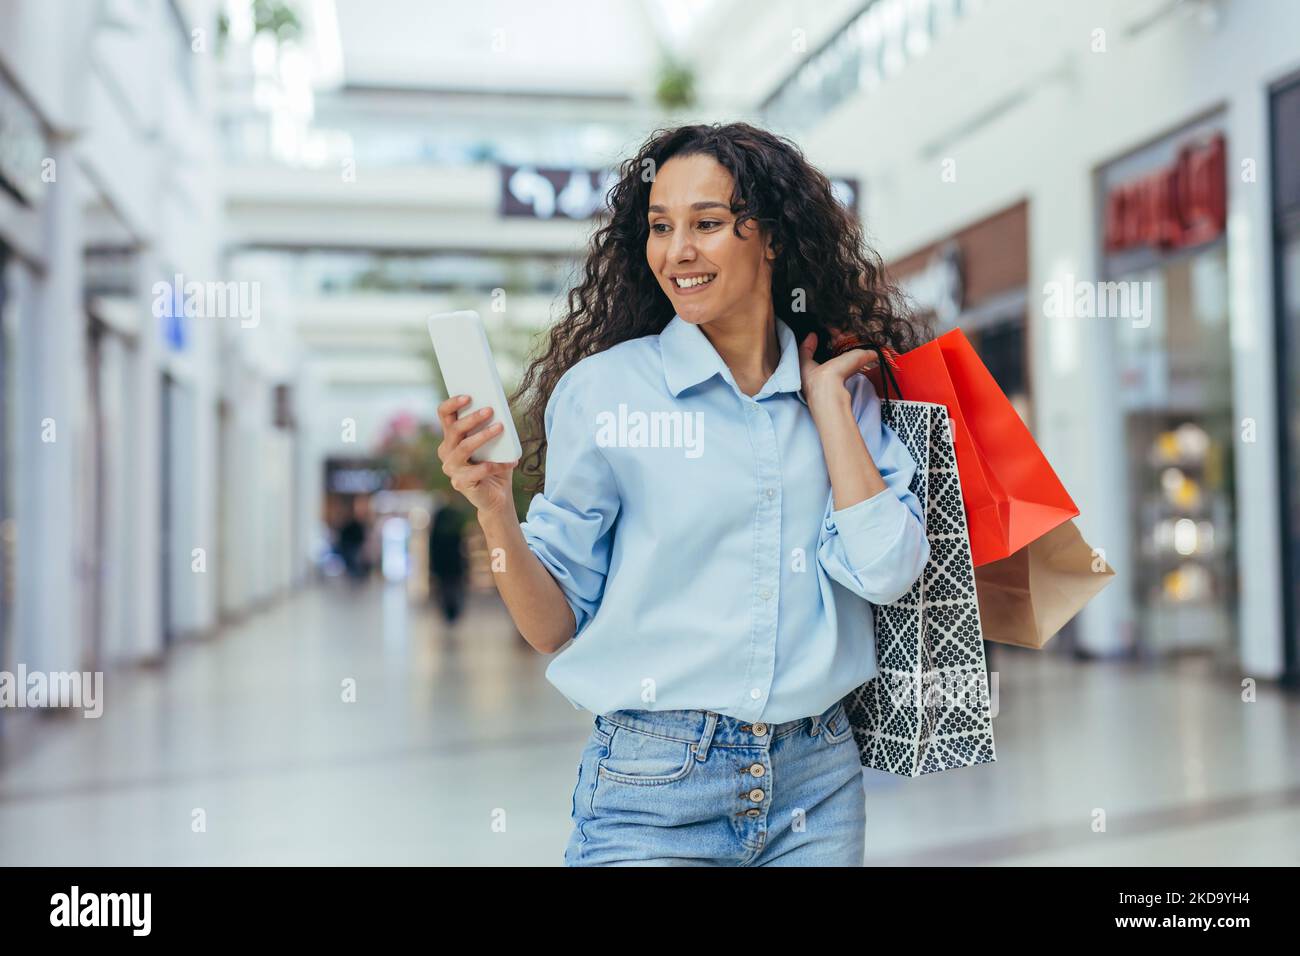 Happy and successful woman shopping for clothes in a supermarket store, Hispanic woman holding a smartphone reading online messages and browsing offers with discounts and sales Stock Photo